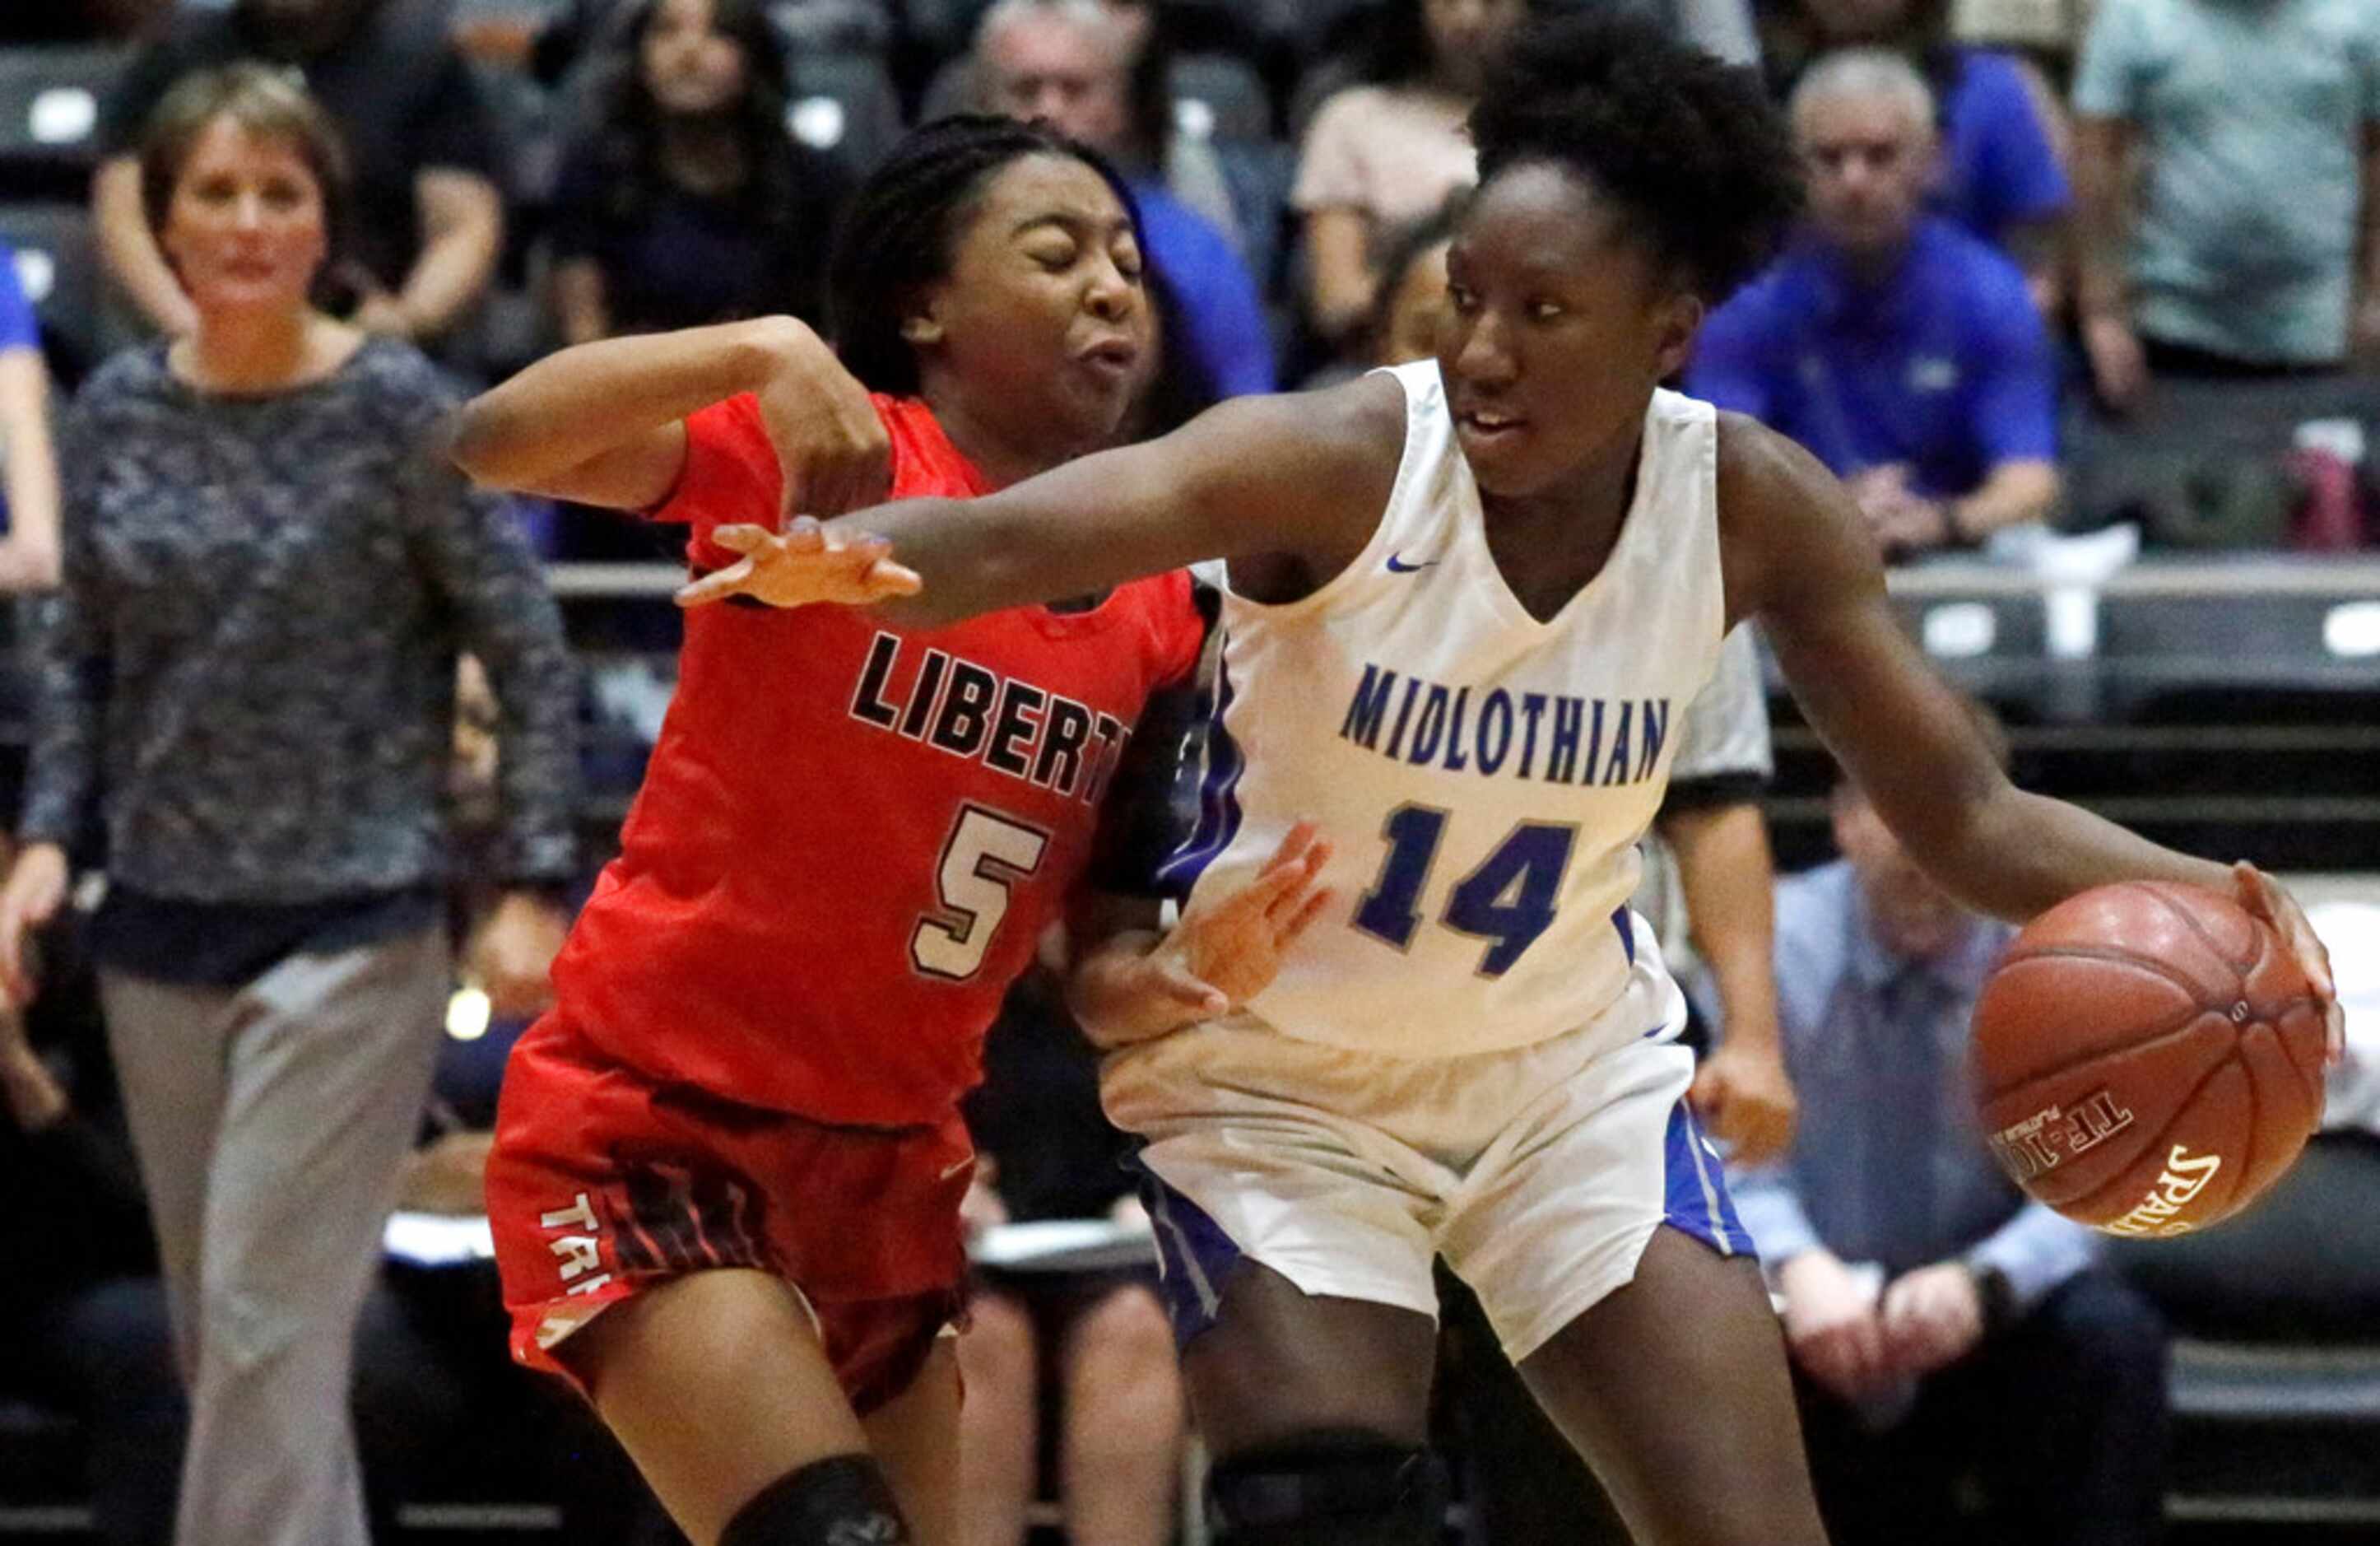 Midlothian High School guard Jerica Henderson (14) protects the ball while Frisco Liberty...